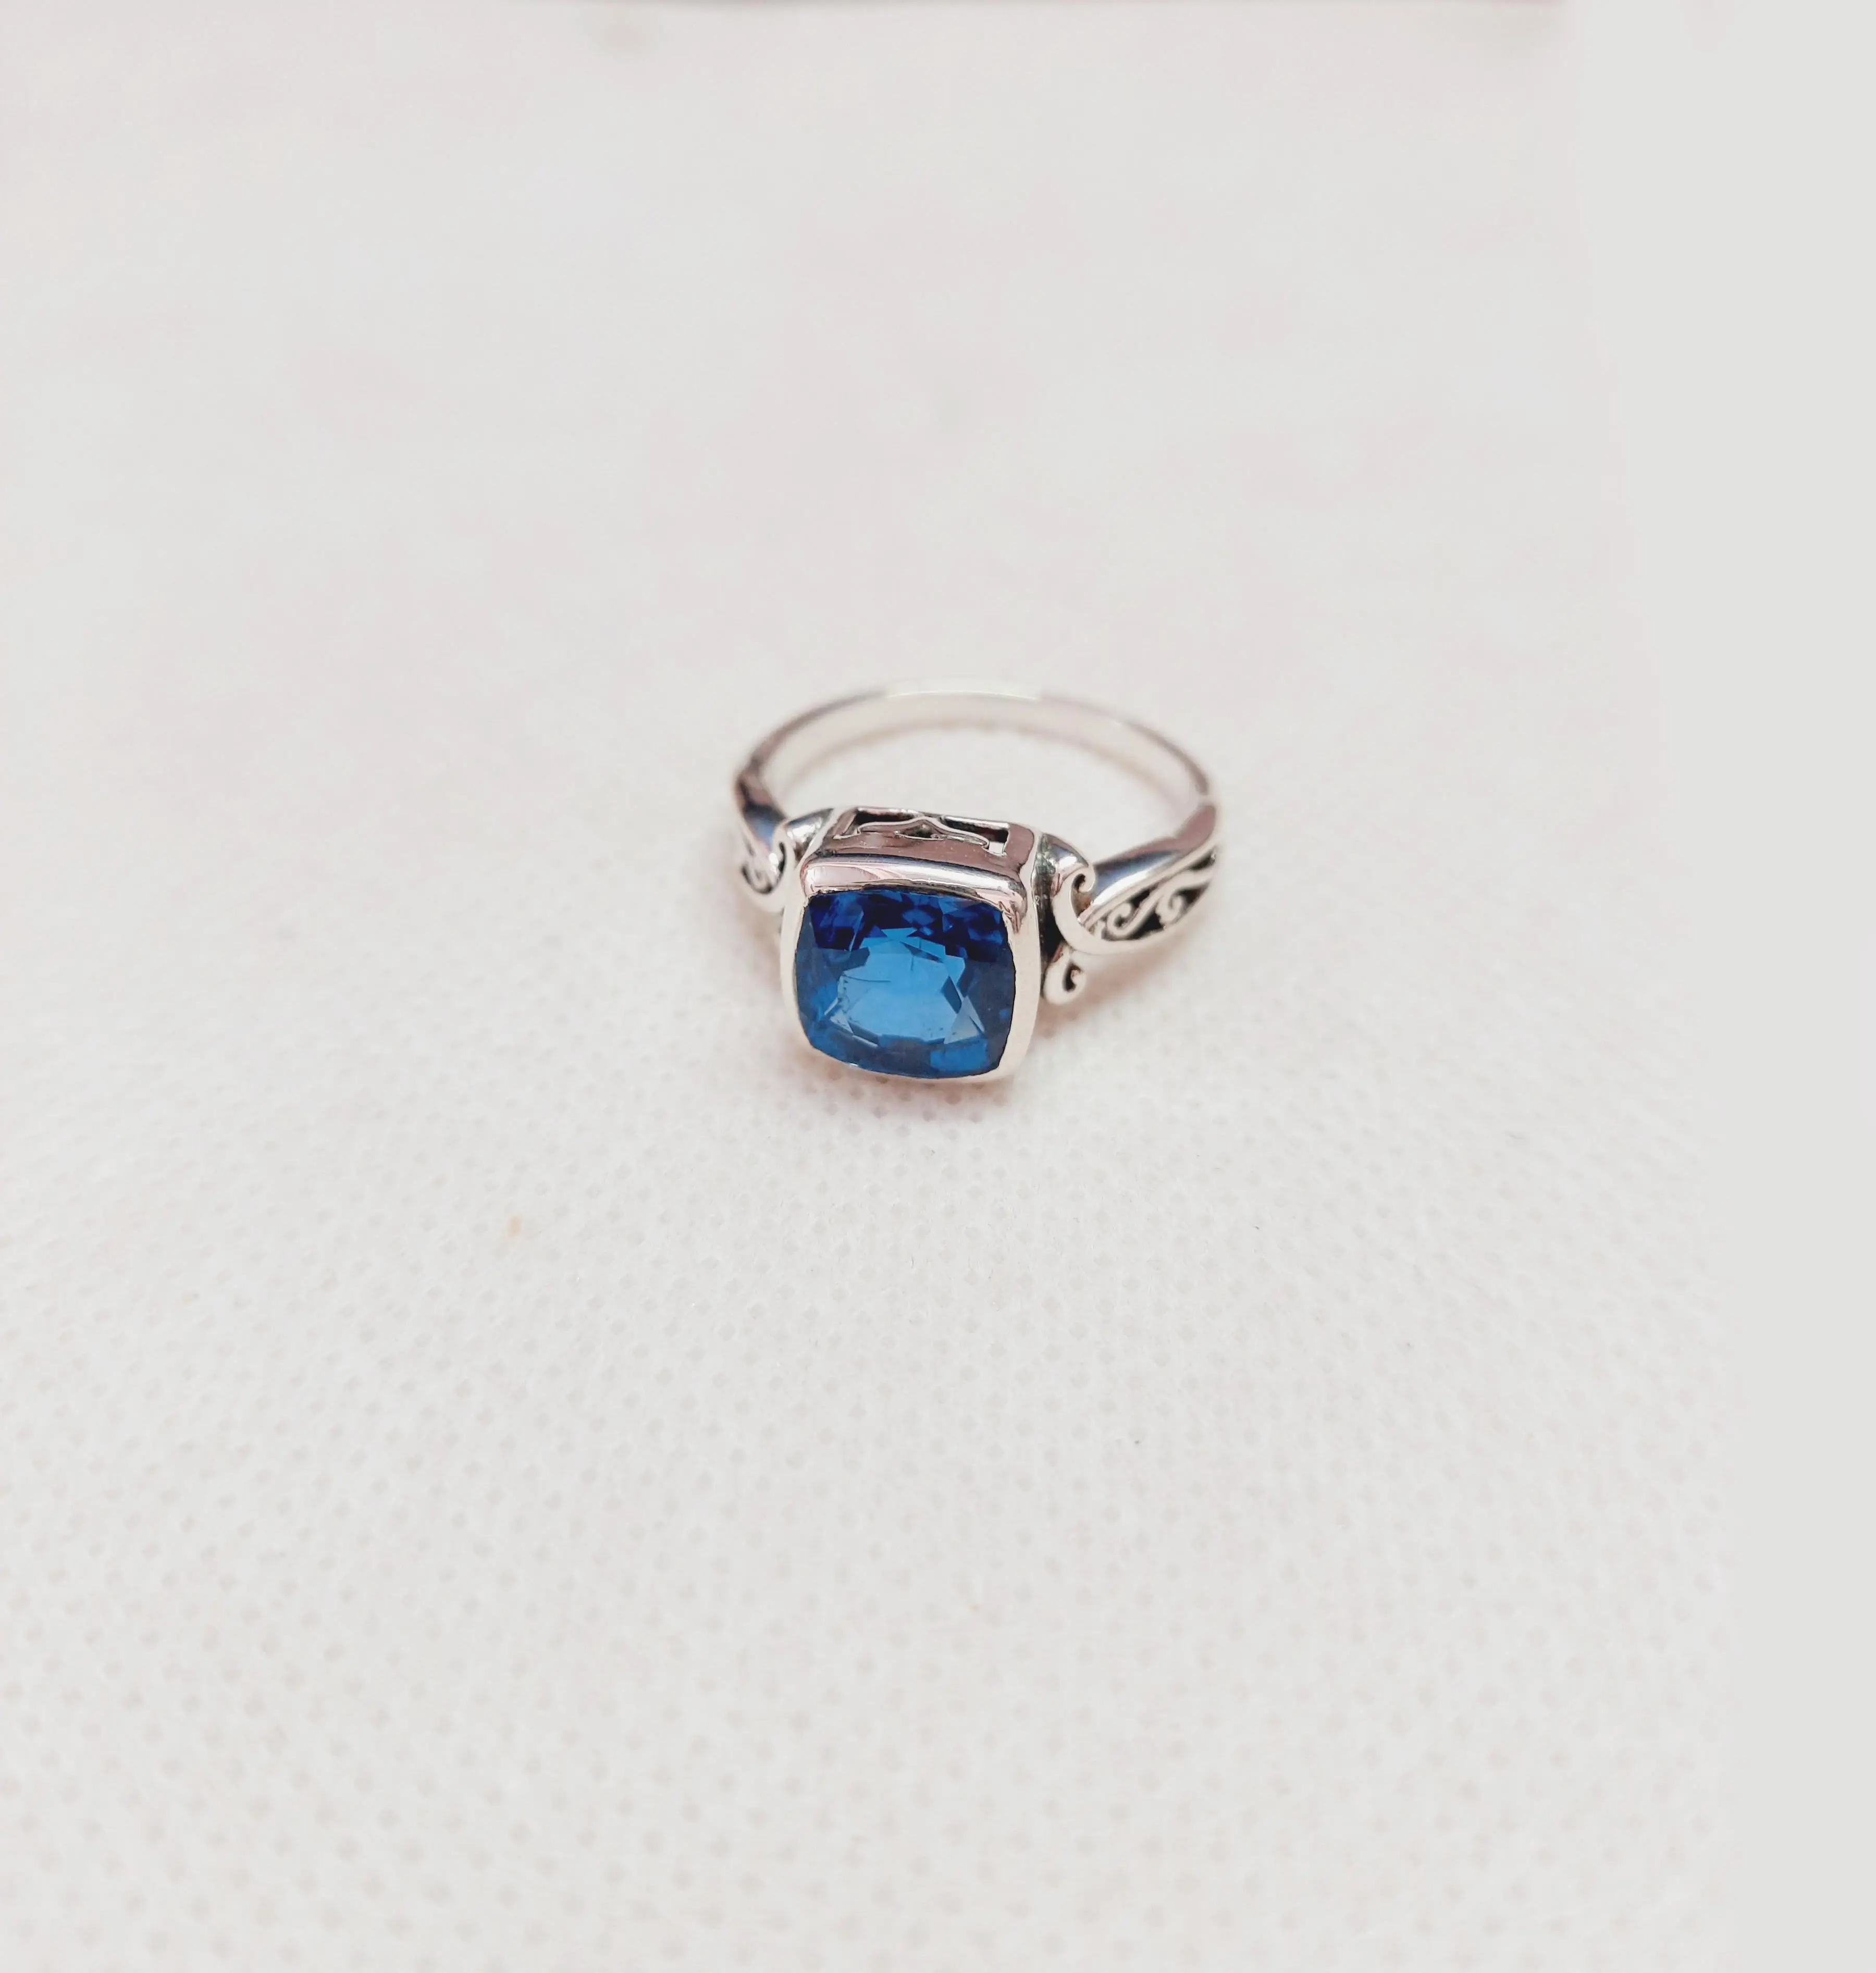 925 Sterling Silver Handmade Ring with Natural London Blue Topaz and Bezal Setting Fine Jewelry for Women